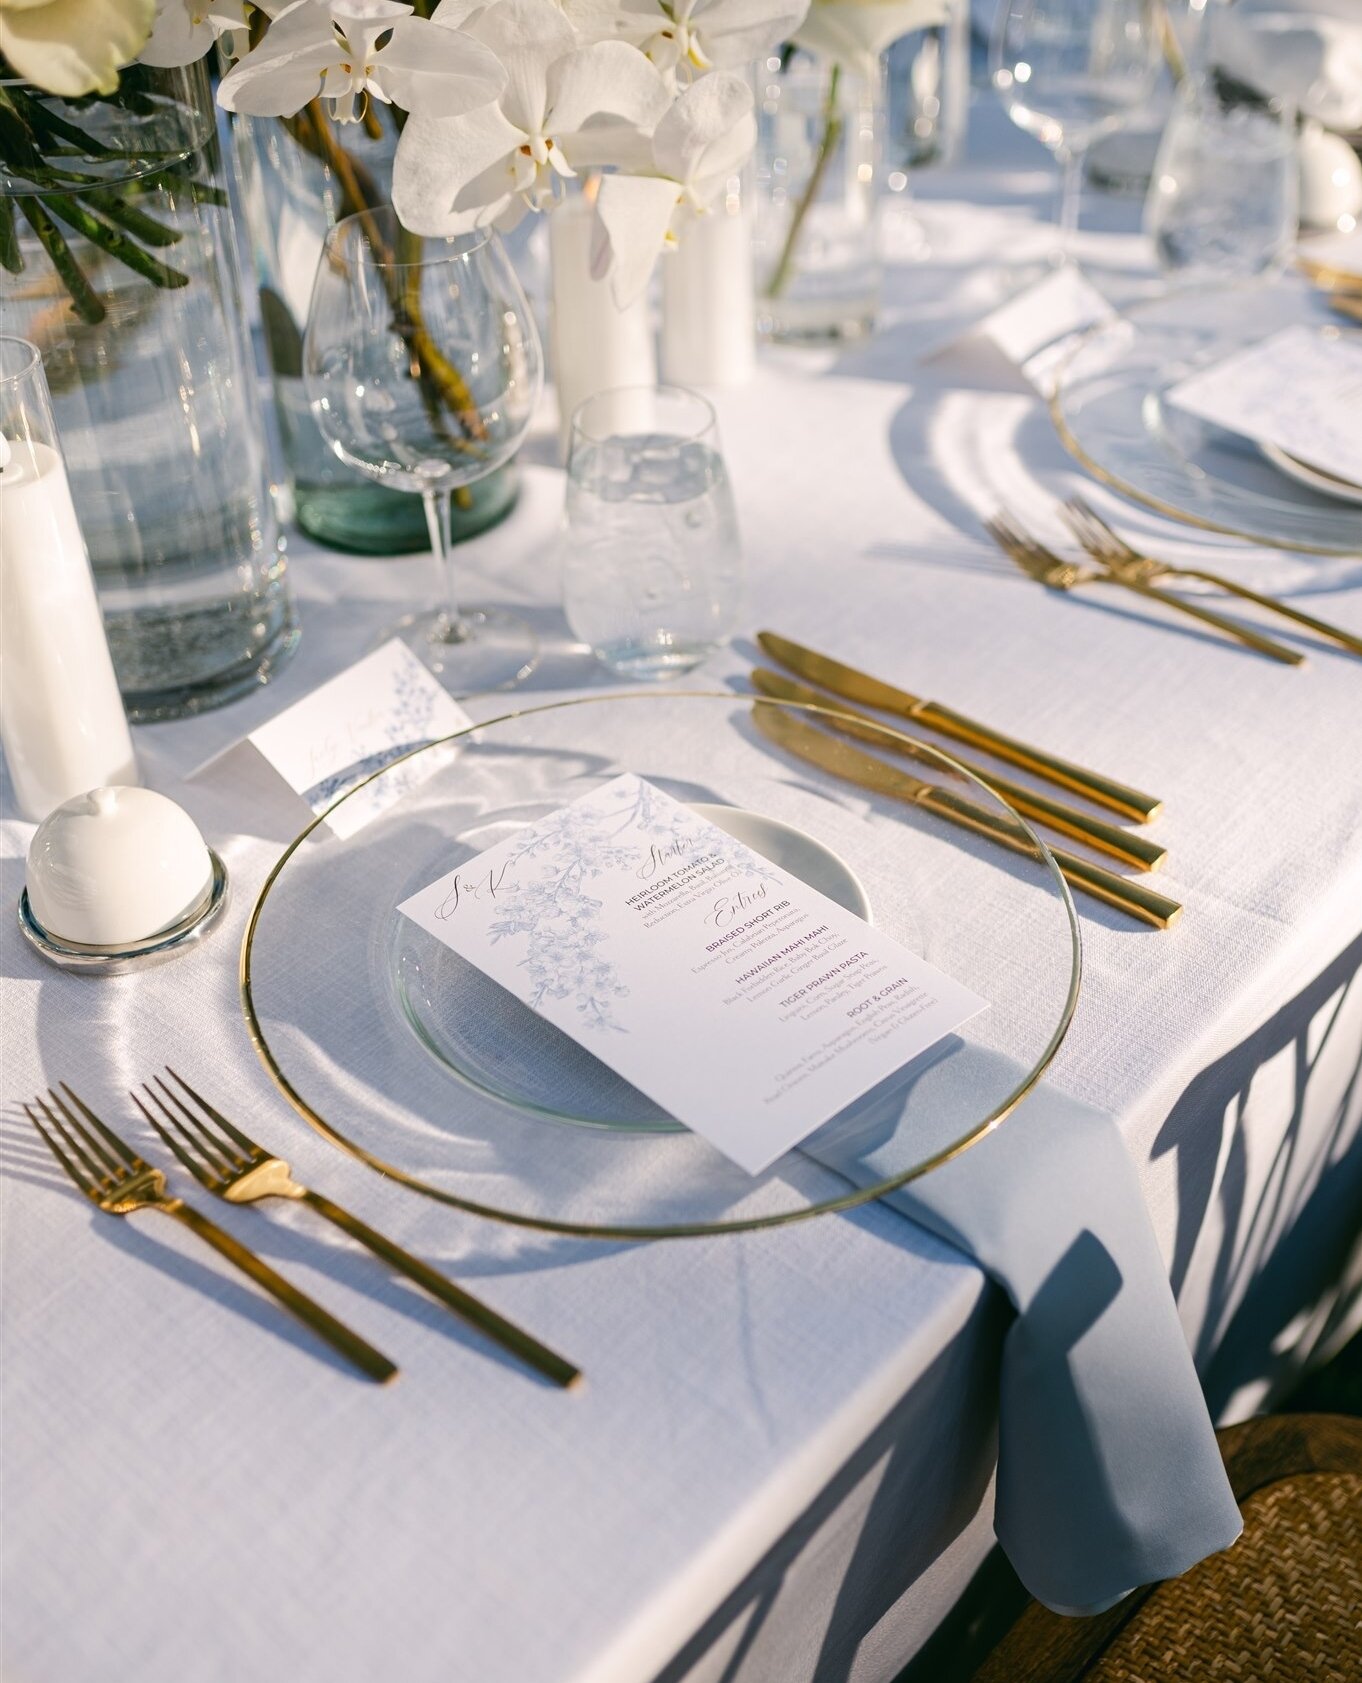 Elegantly designed place settings make our hearts go pitter patter. ⁠